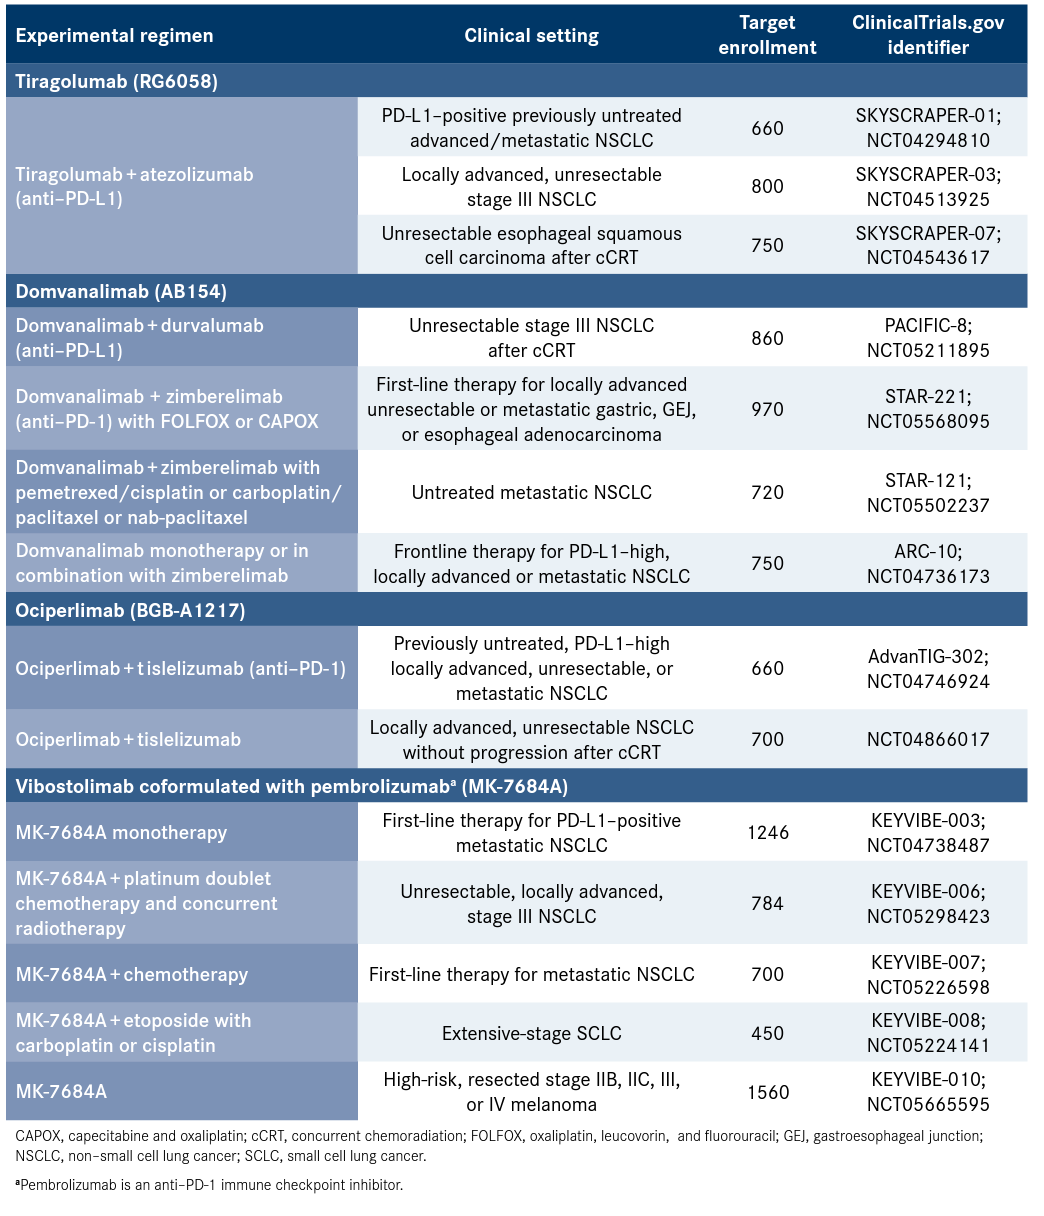 Table. Select Phase 3 Clinical Trials of TIGIT-Targeting Antibodies2